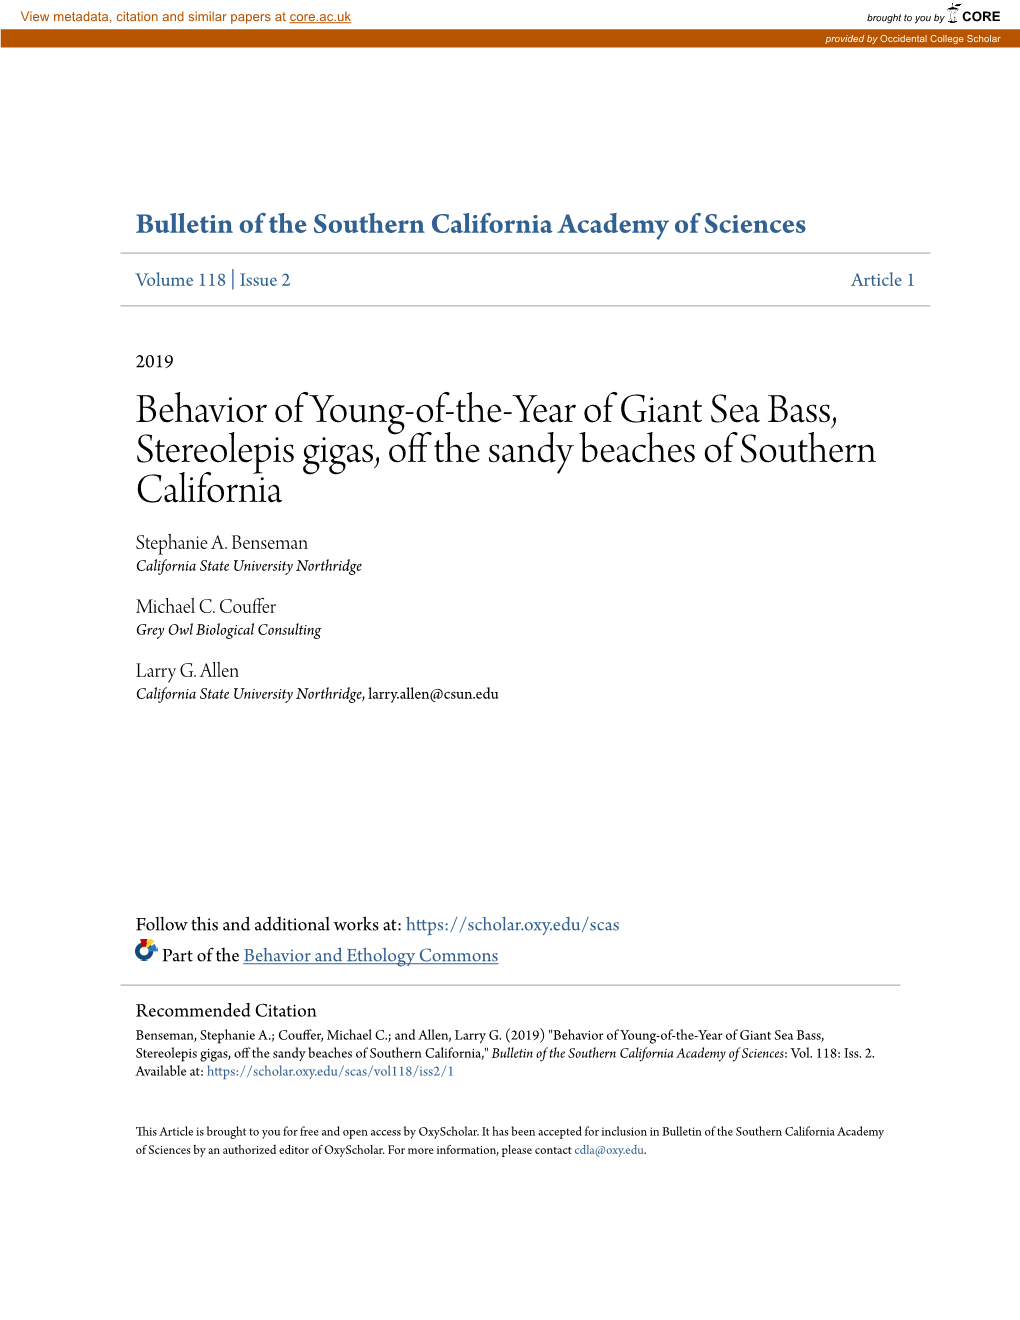 Behavior of Young-Of-The-Year of Giant Sea Bass, Stereolepis Gigas, Off the As Ndy Beaches of Southern California Stephanie A